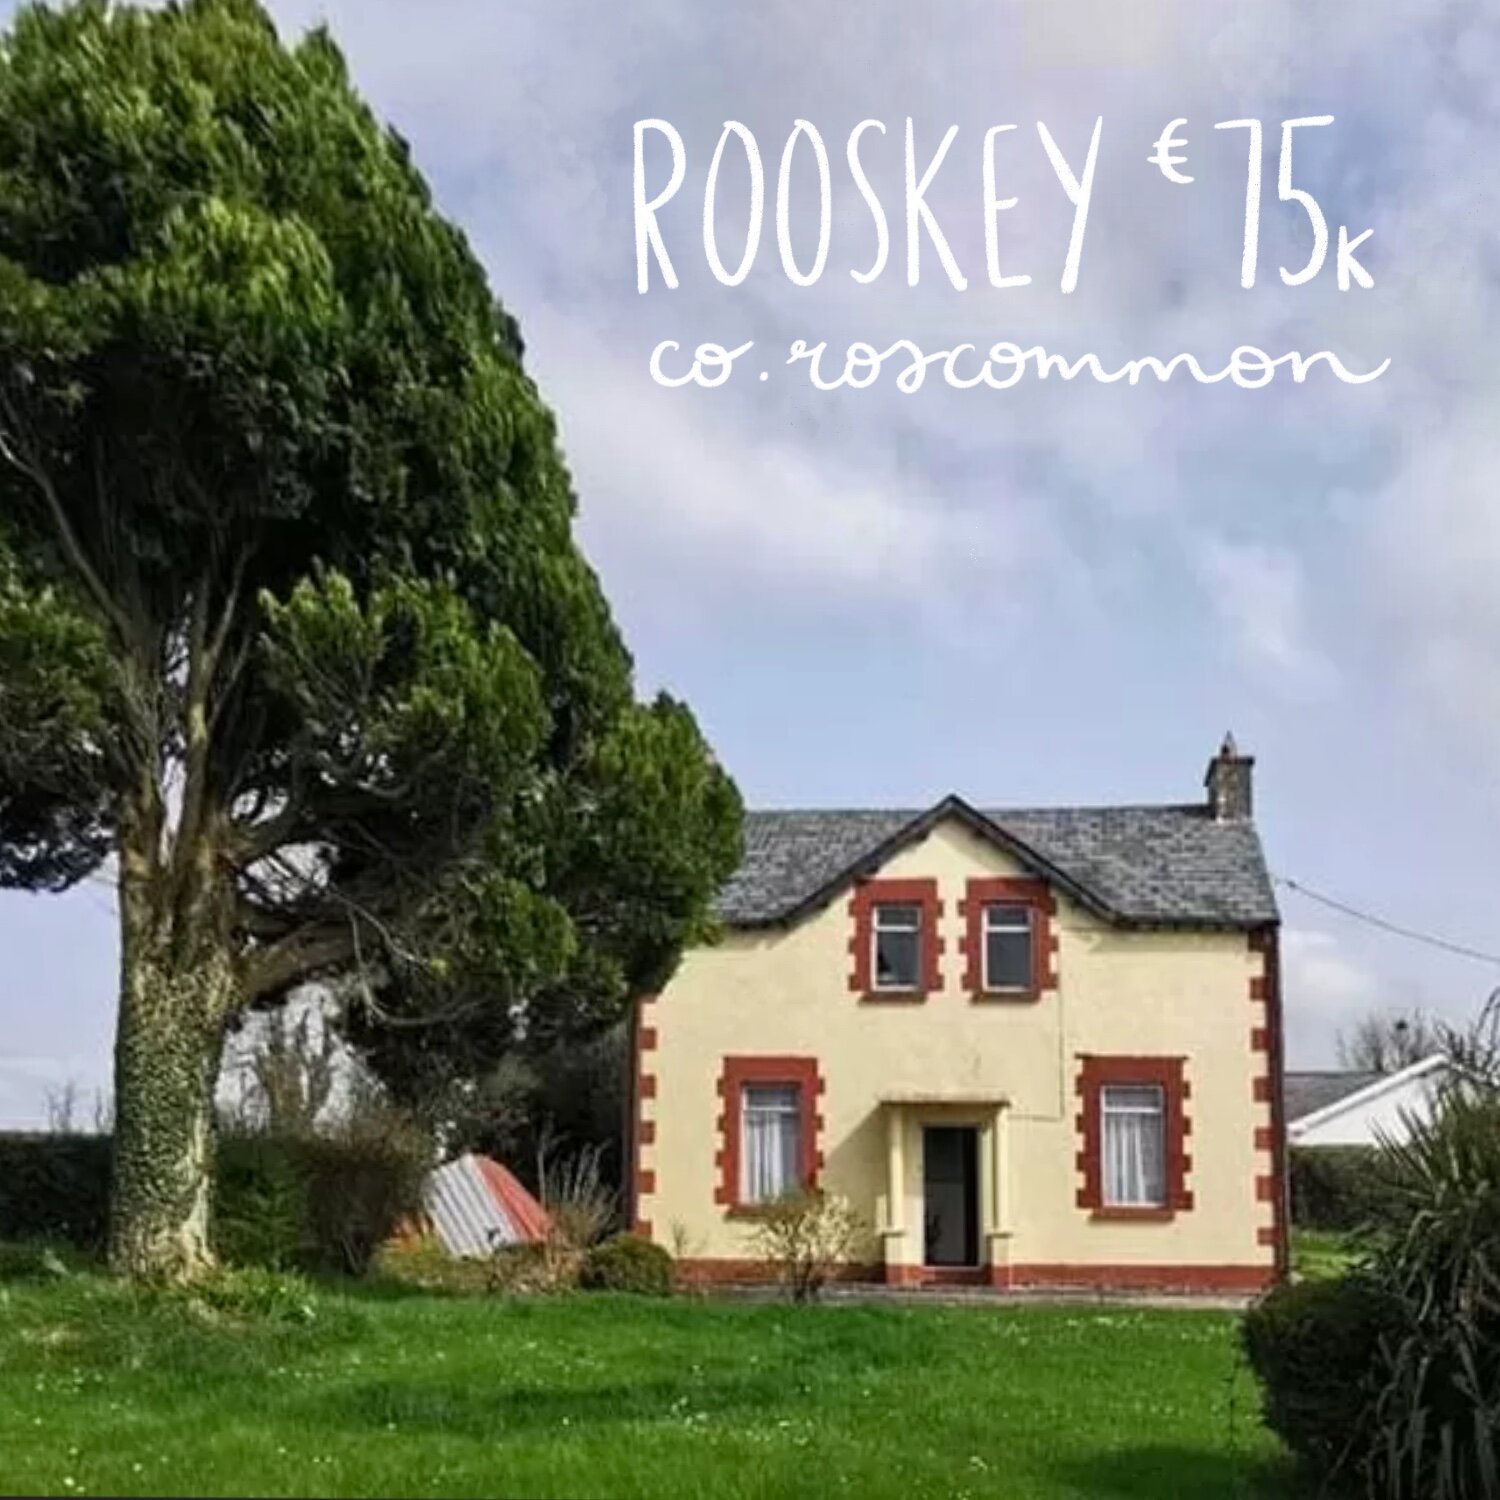 Cloonfower, Rooskey, Co. Roscommon. €75k